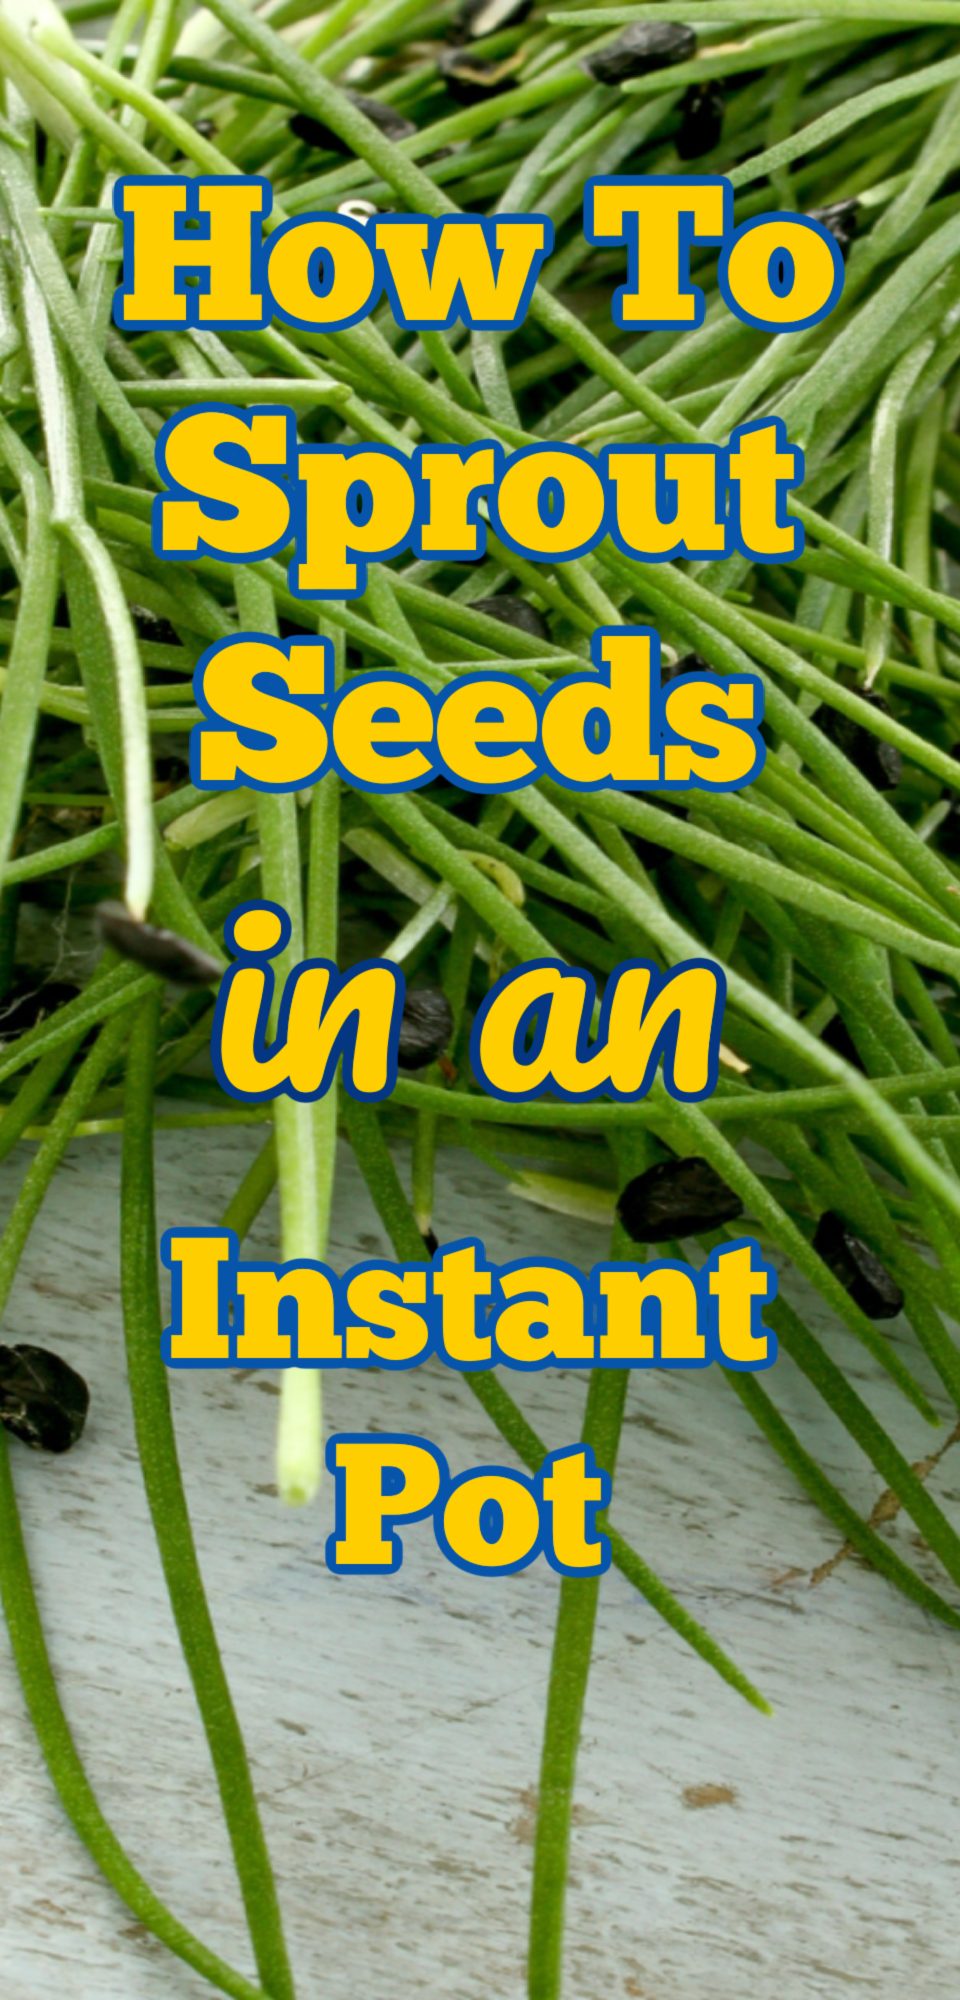 How To Sprout Seeds in an Instant Pot